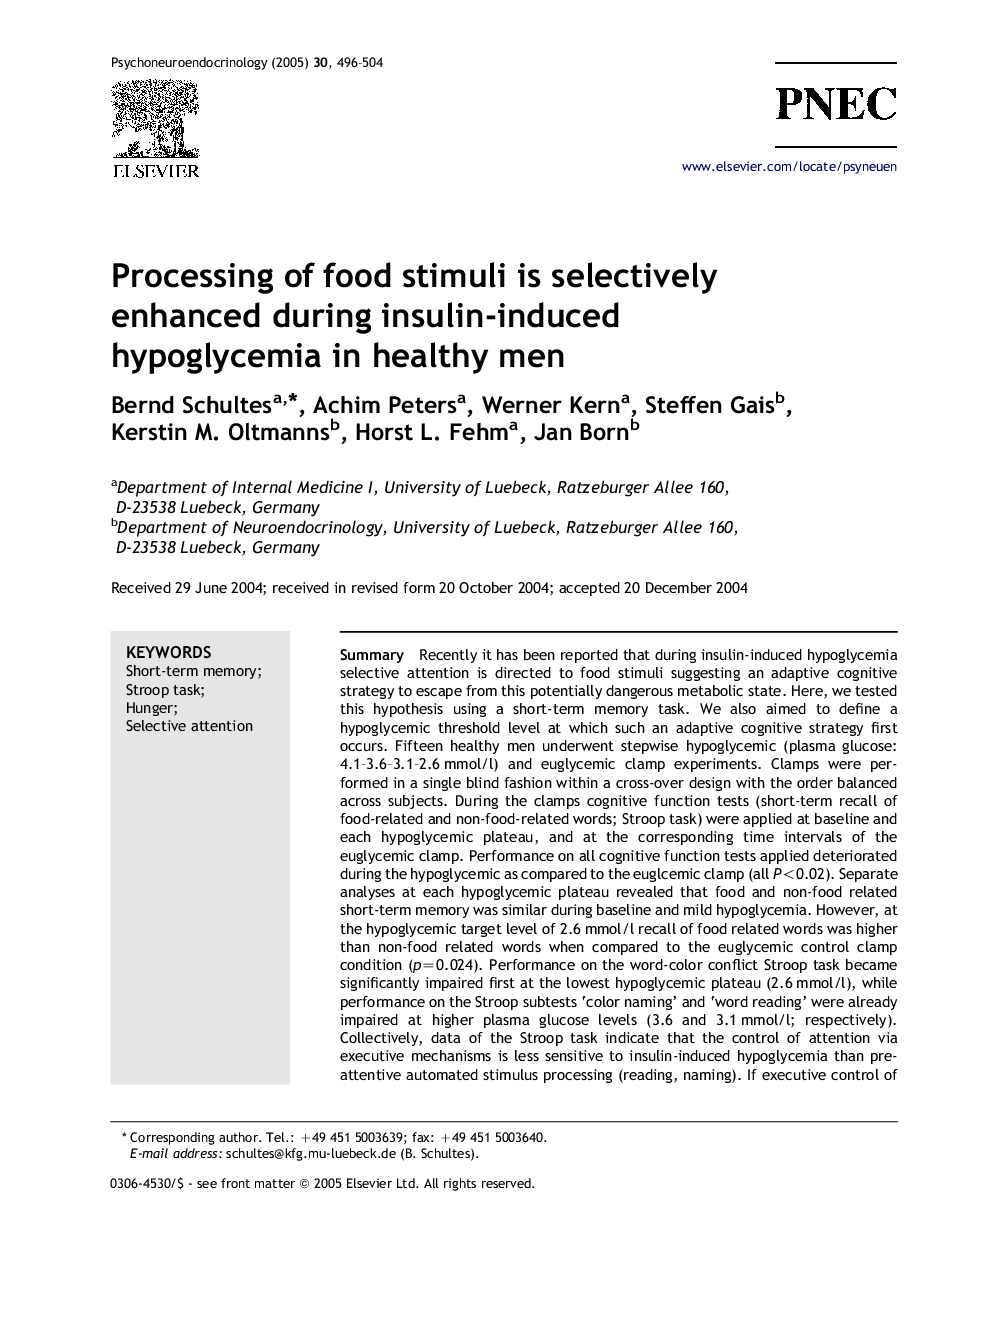 Processing of food stimuli is selectively enhanced during insulin-induced hypoglycemia in healthy men